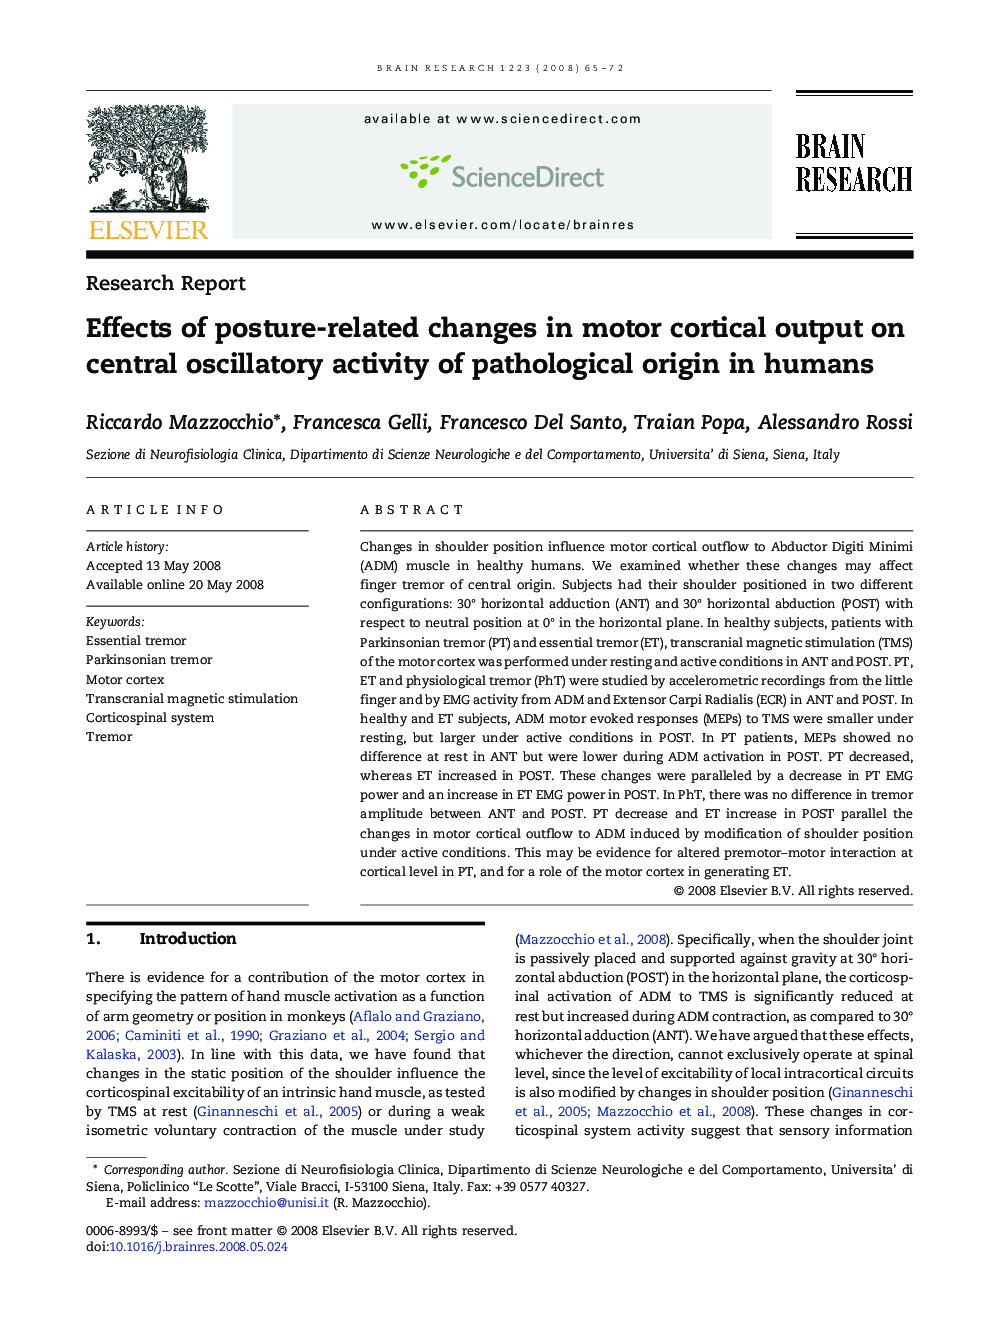 Effects of posture-related changes in motor cortical output on central oscillatory activity of pathological origin in humans